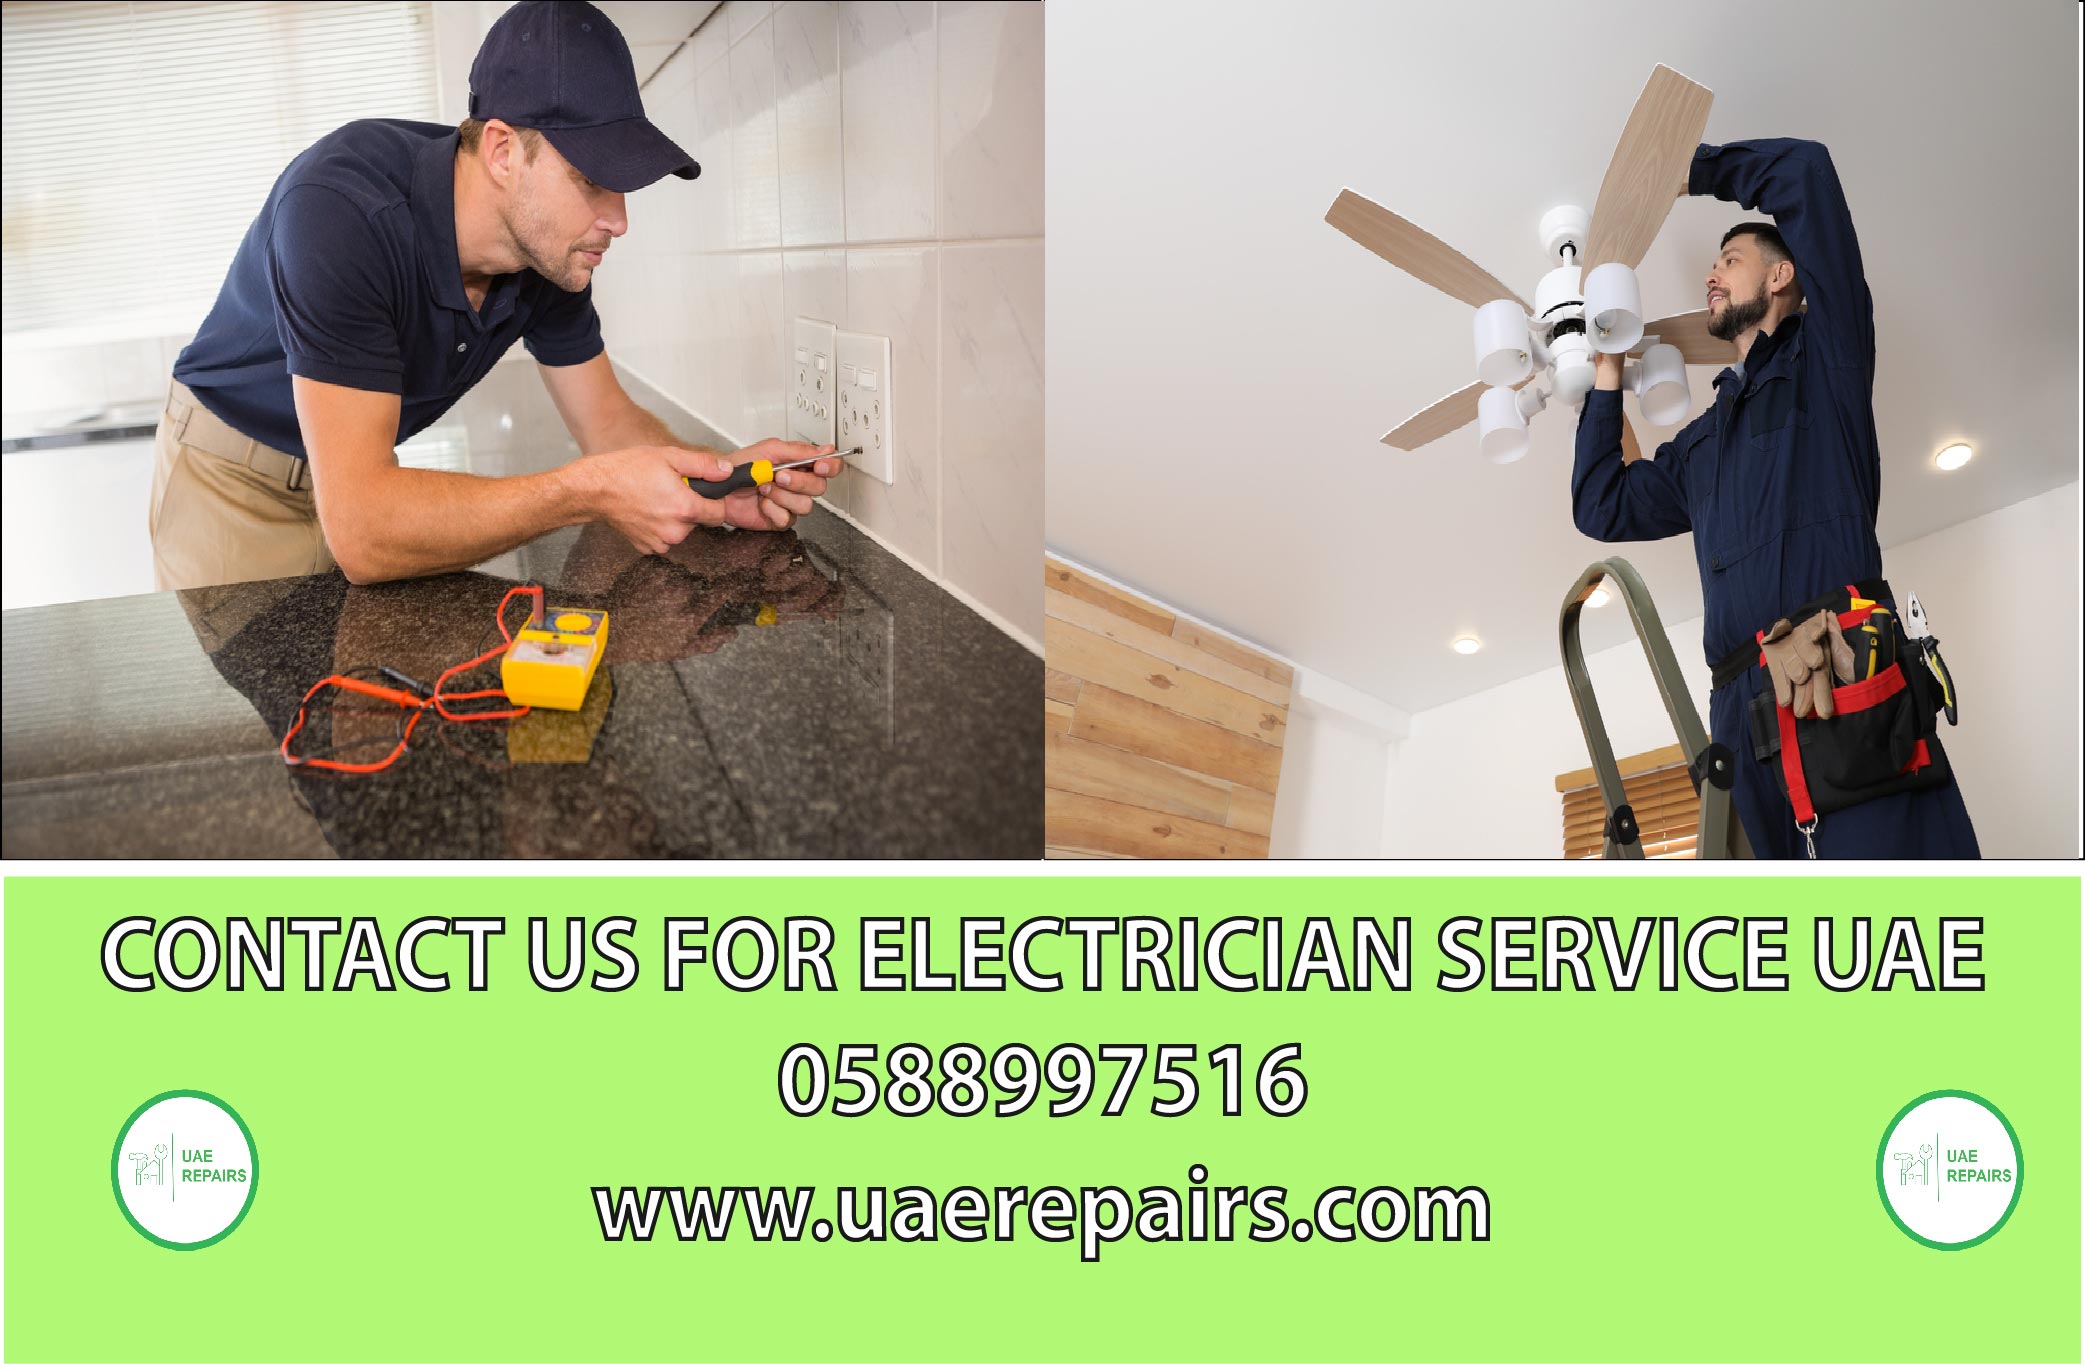 CONTACT US 0588997516 FOR ELECTRICIAN SERVICE IN UAE